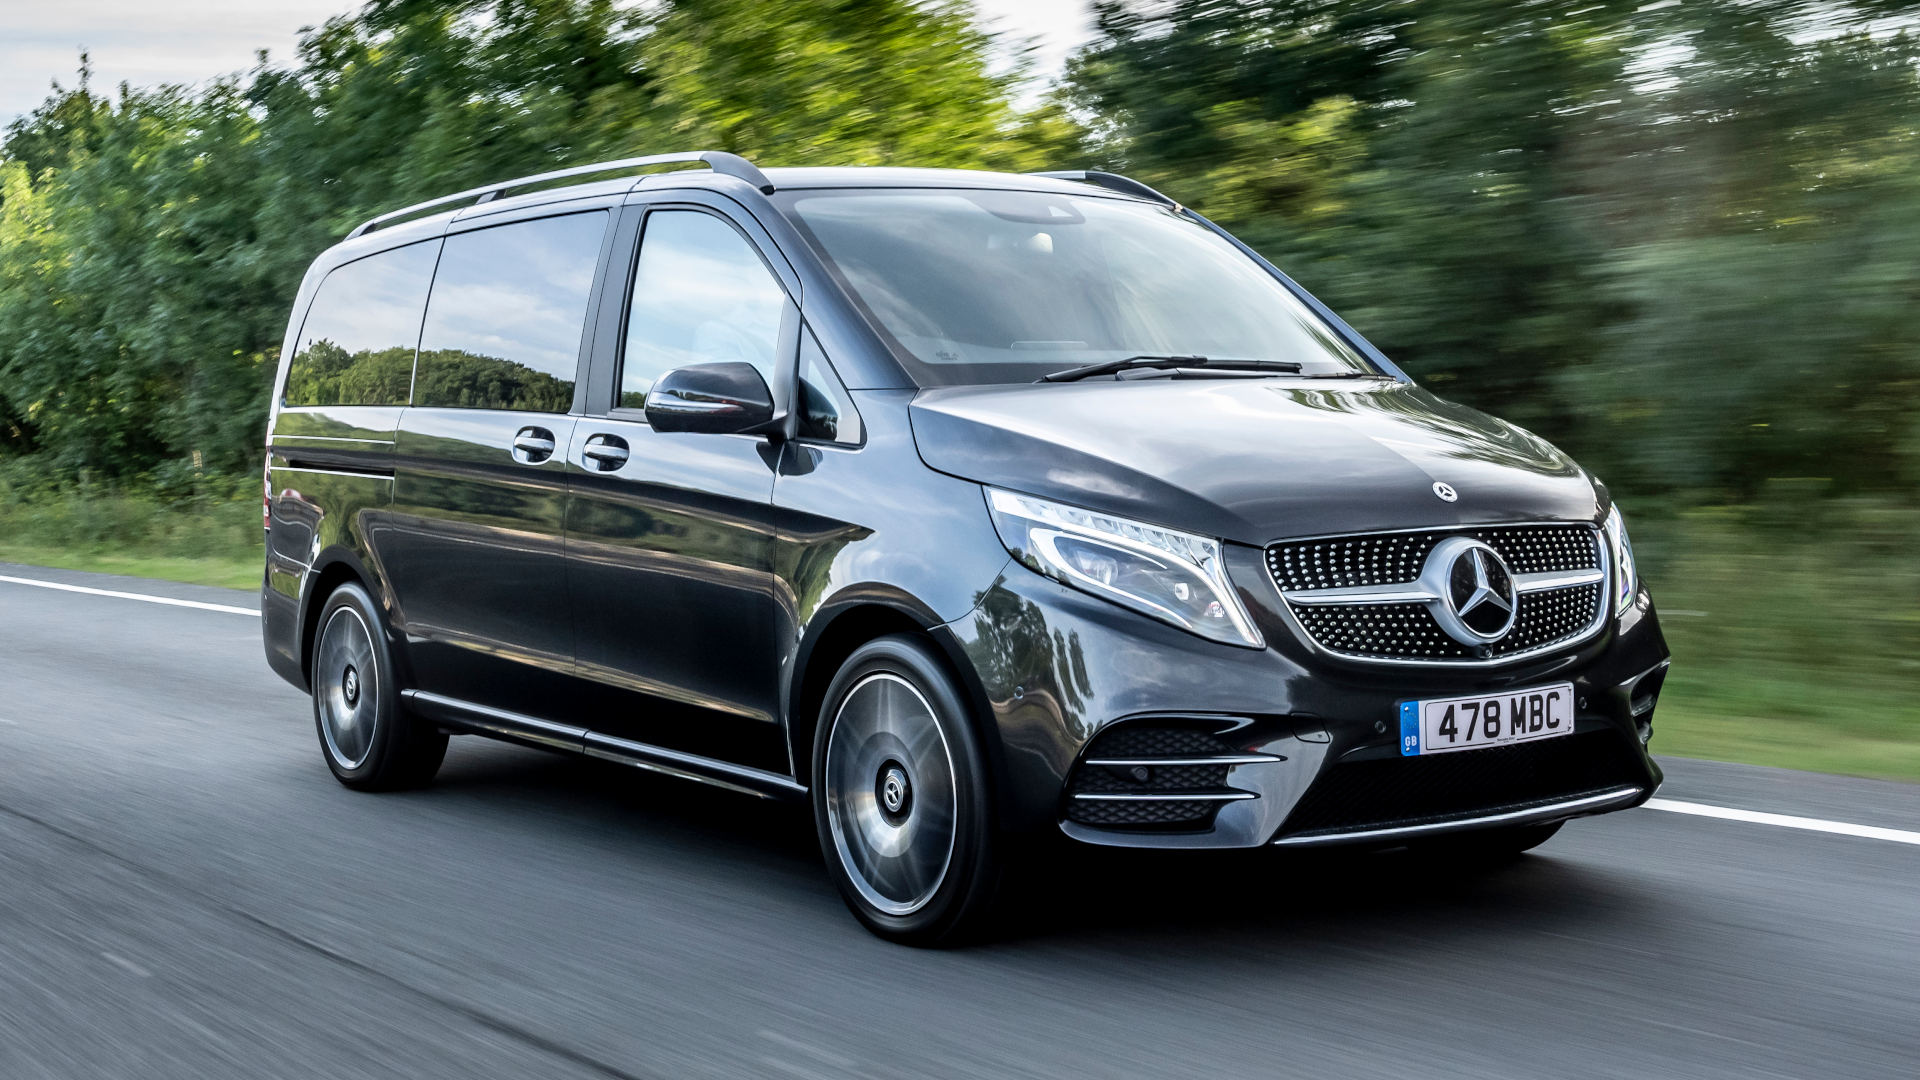 New Vito now available